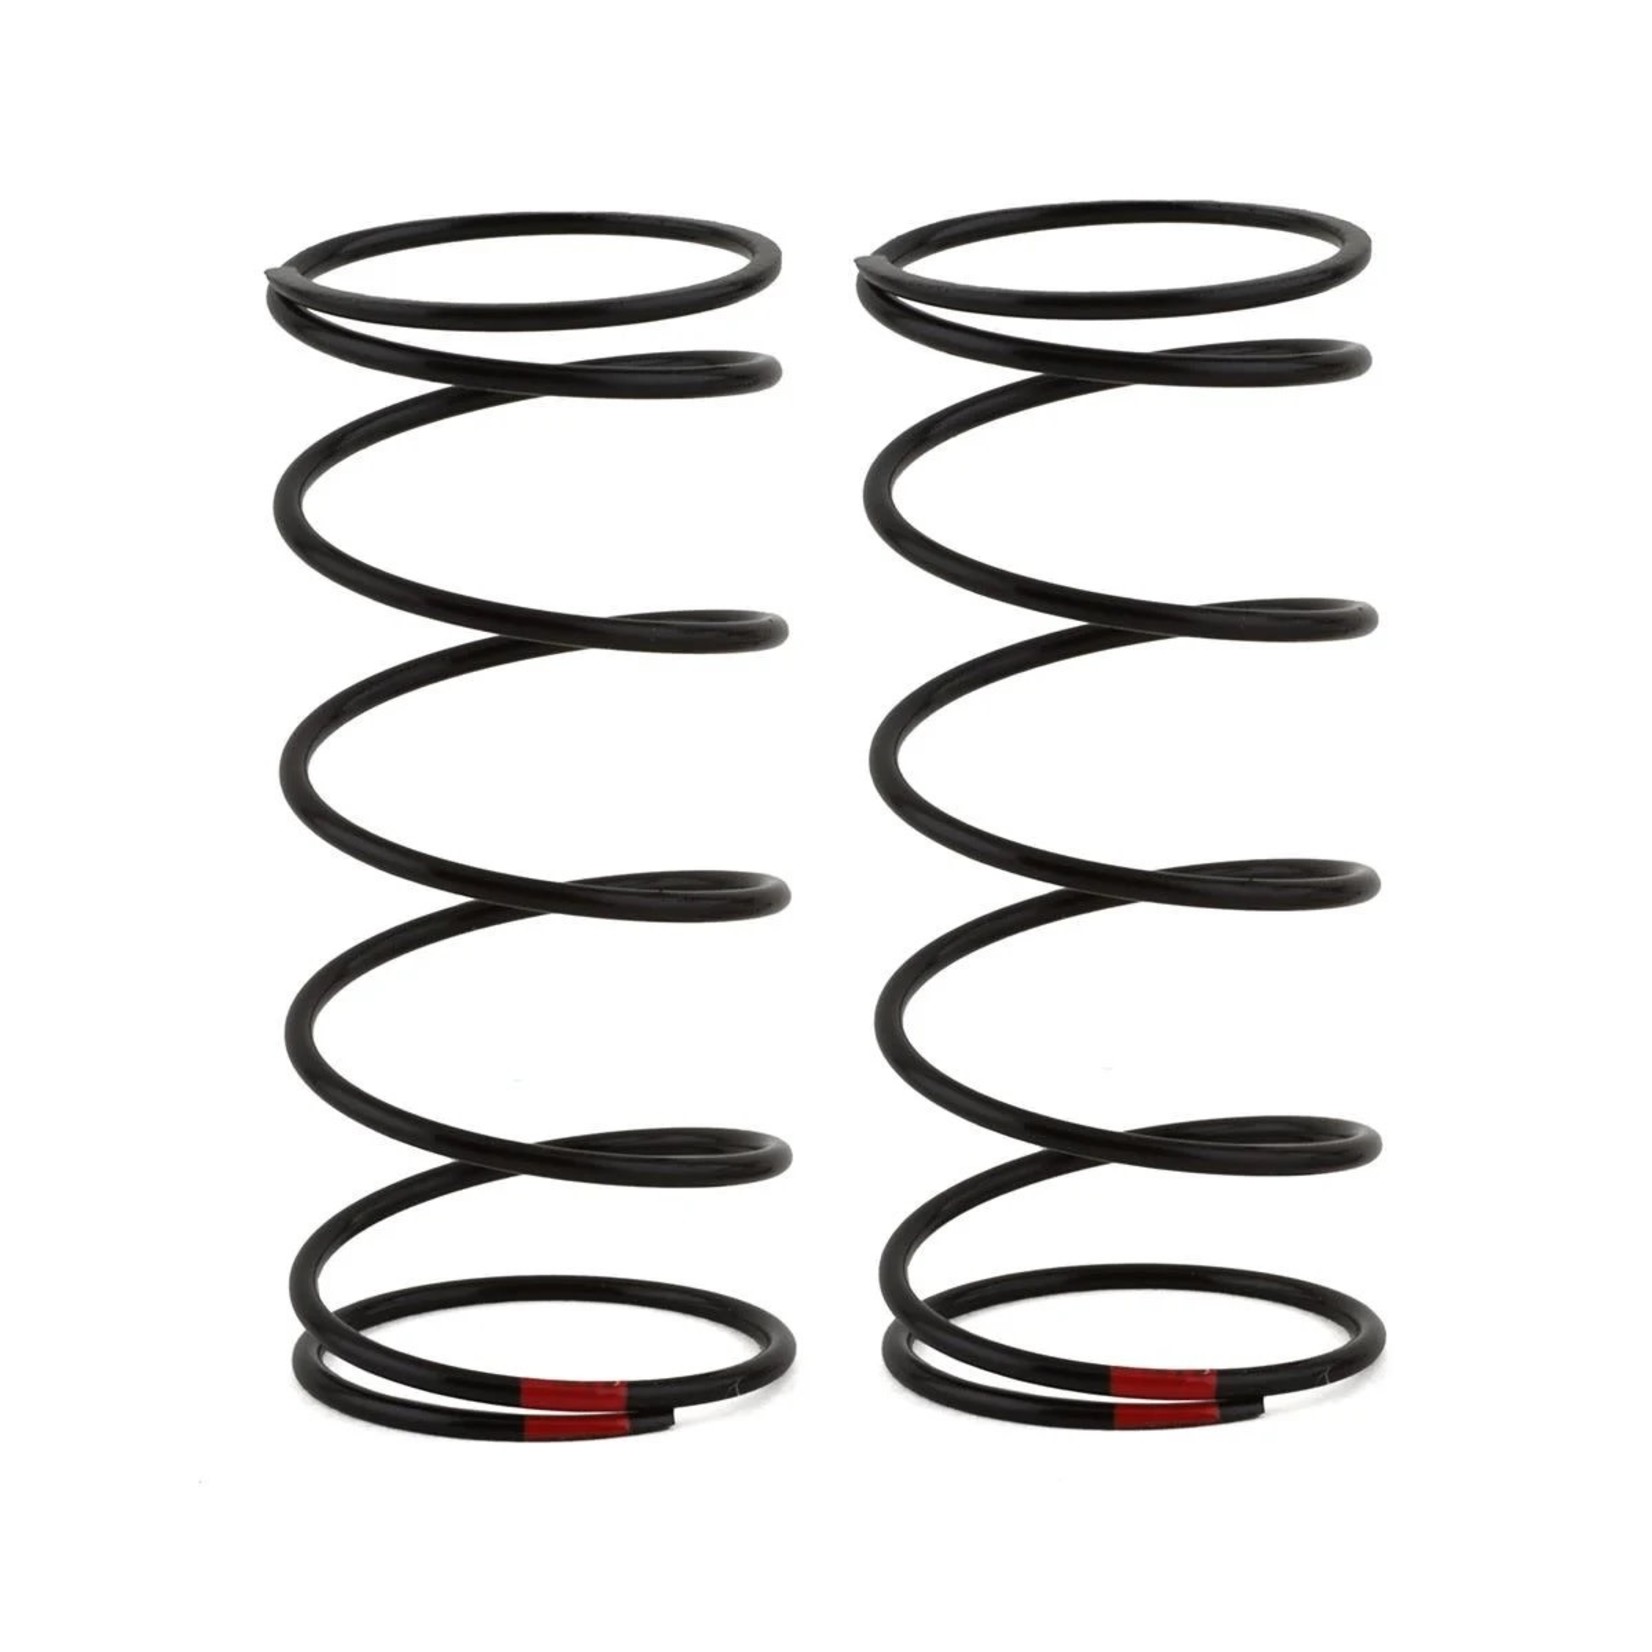 Team Associated Team Associated 13mm Front Shock Spring (Red/4.0lbs) (44mm) #91944